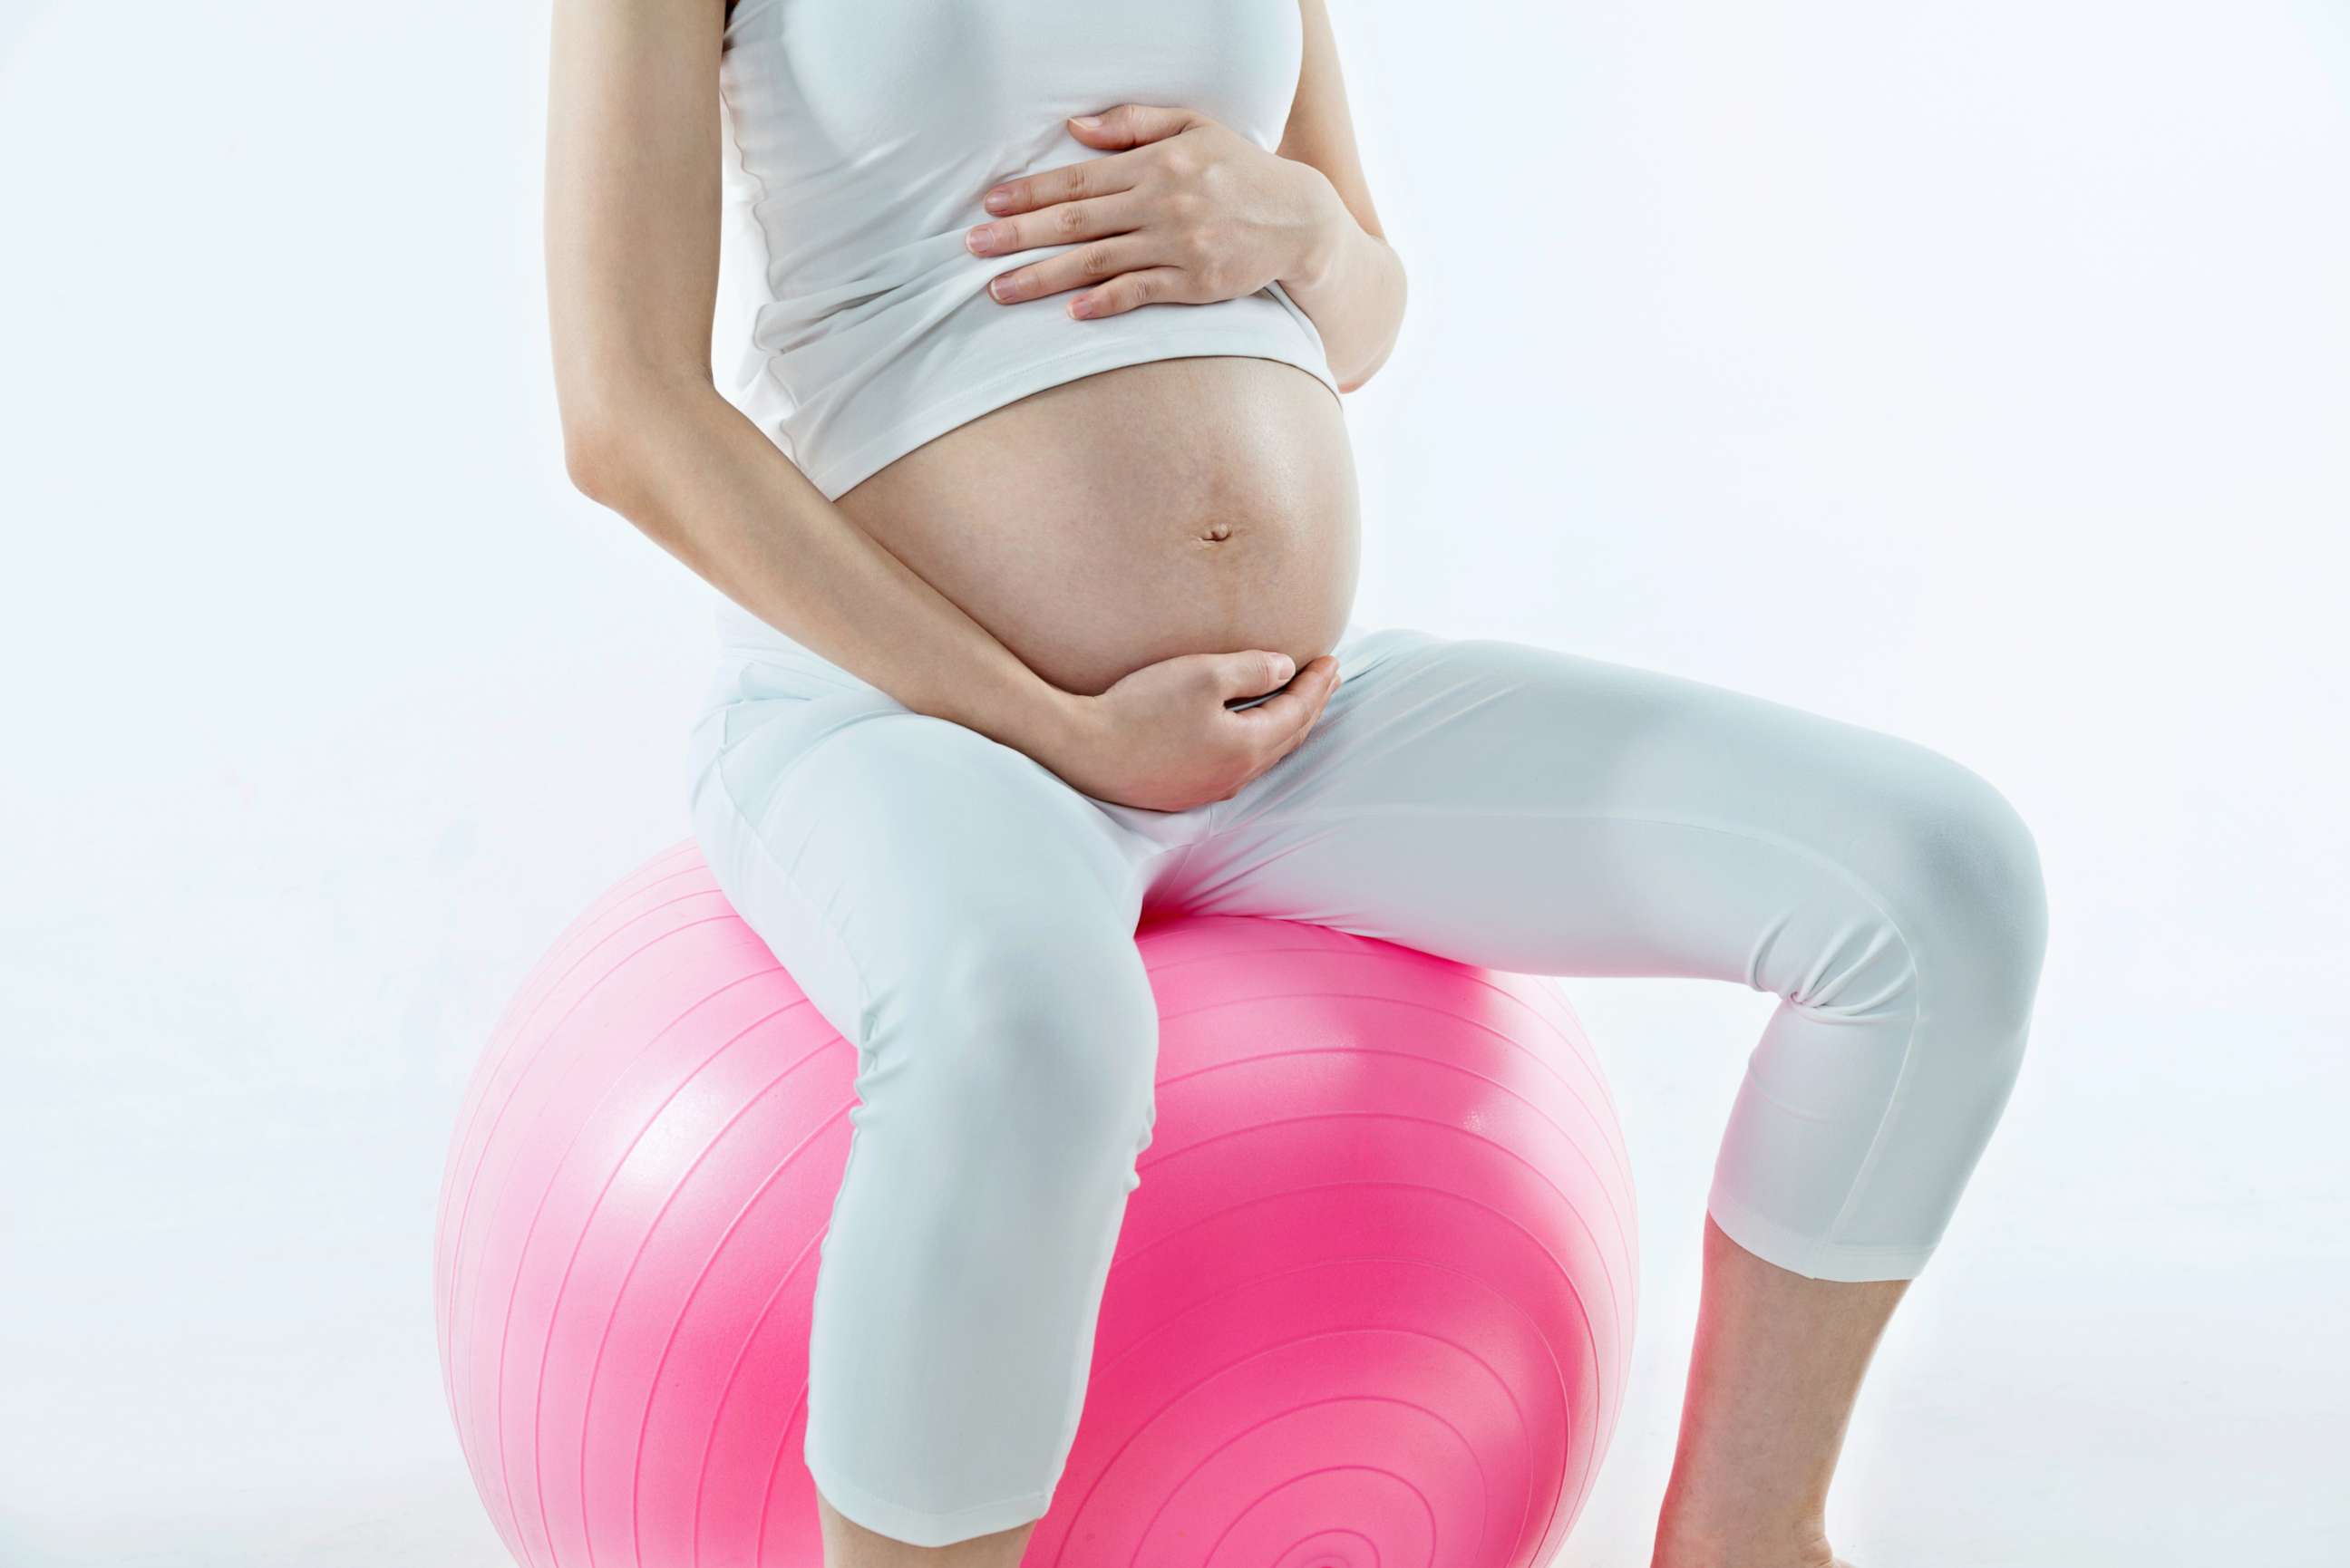 PHOTO: A pregnant woman sits on a fitness ball in this undated file photo.